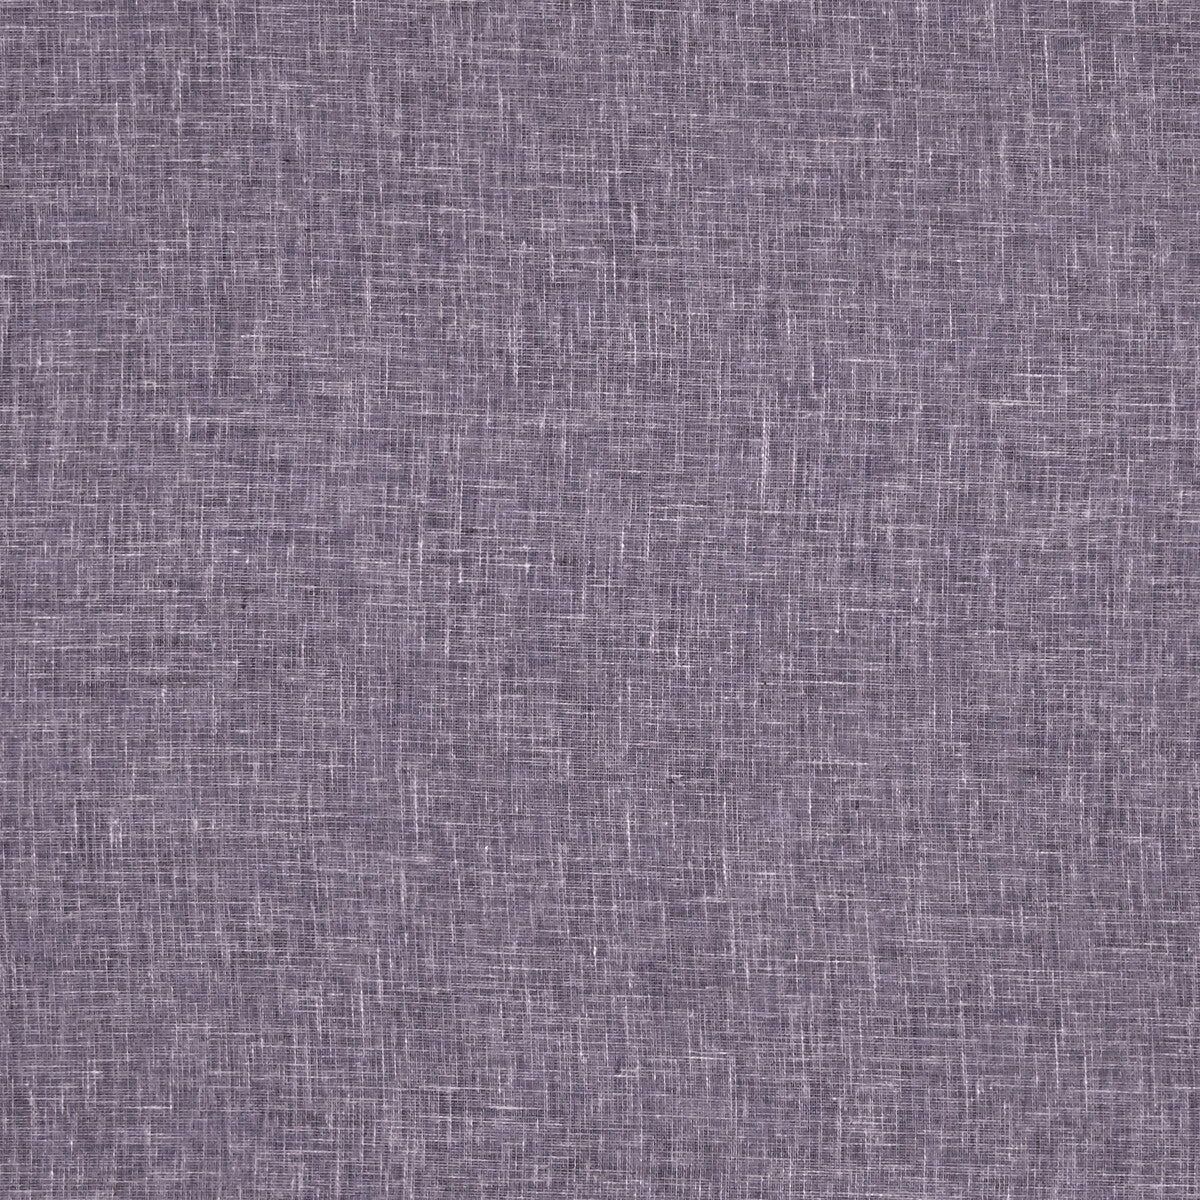 Midori fabric in damson color - pattern F1068/09.CAC.0 - by Clarke And Clarke in the Clarke &amp; Clarke Midori collection